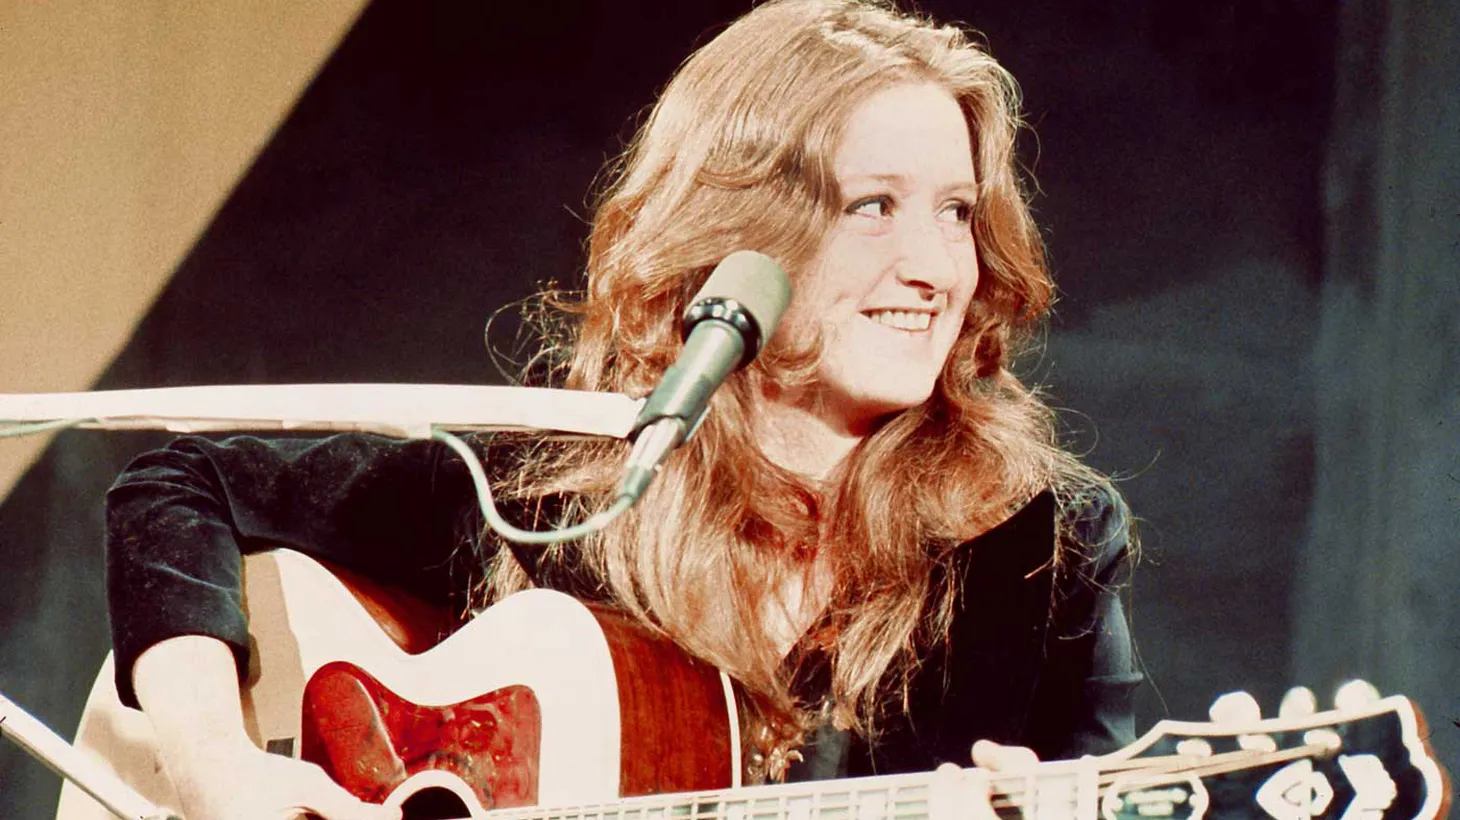 Bonnie Raitt is one of the Laurel Canyon musicians captured in Ginny Winn’s book, “Grievous Angels, Trout Masks, and American Beauties: 1970s Rock & Roll Photography of Ginny Winn.”